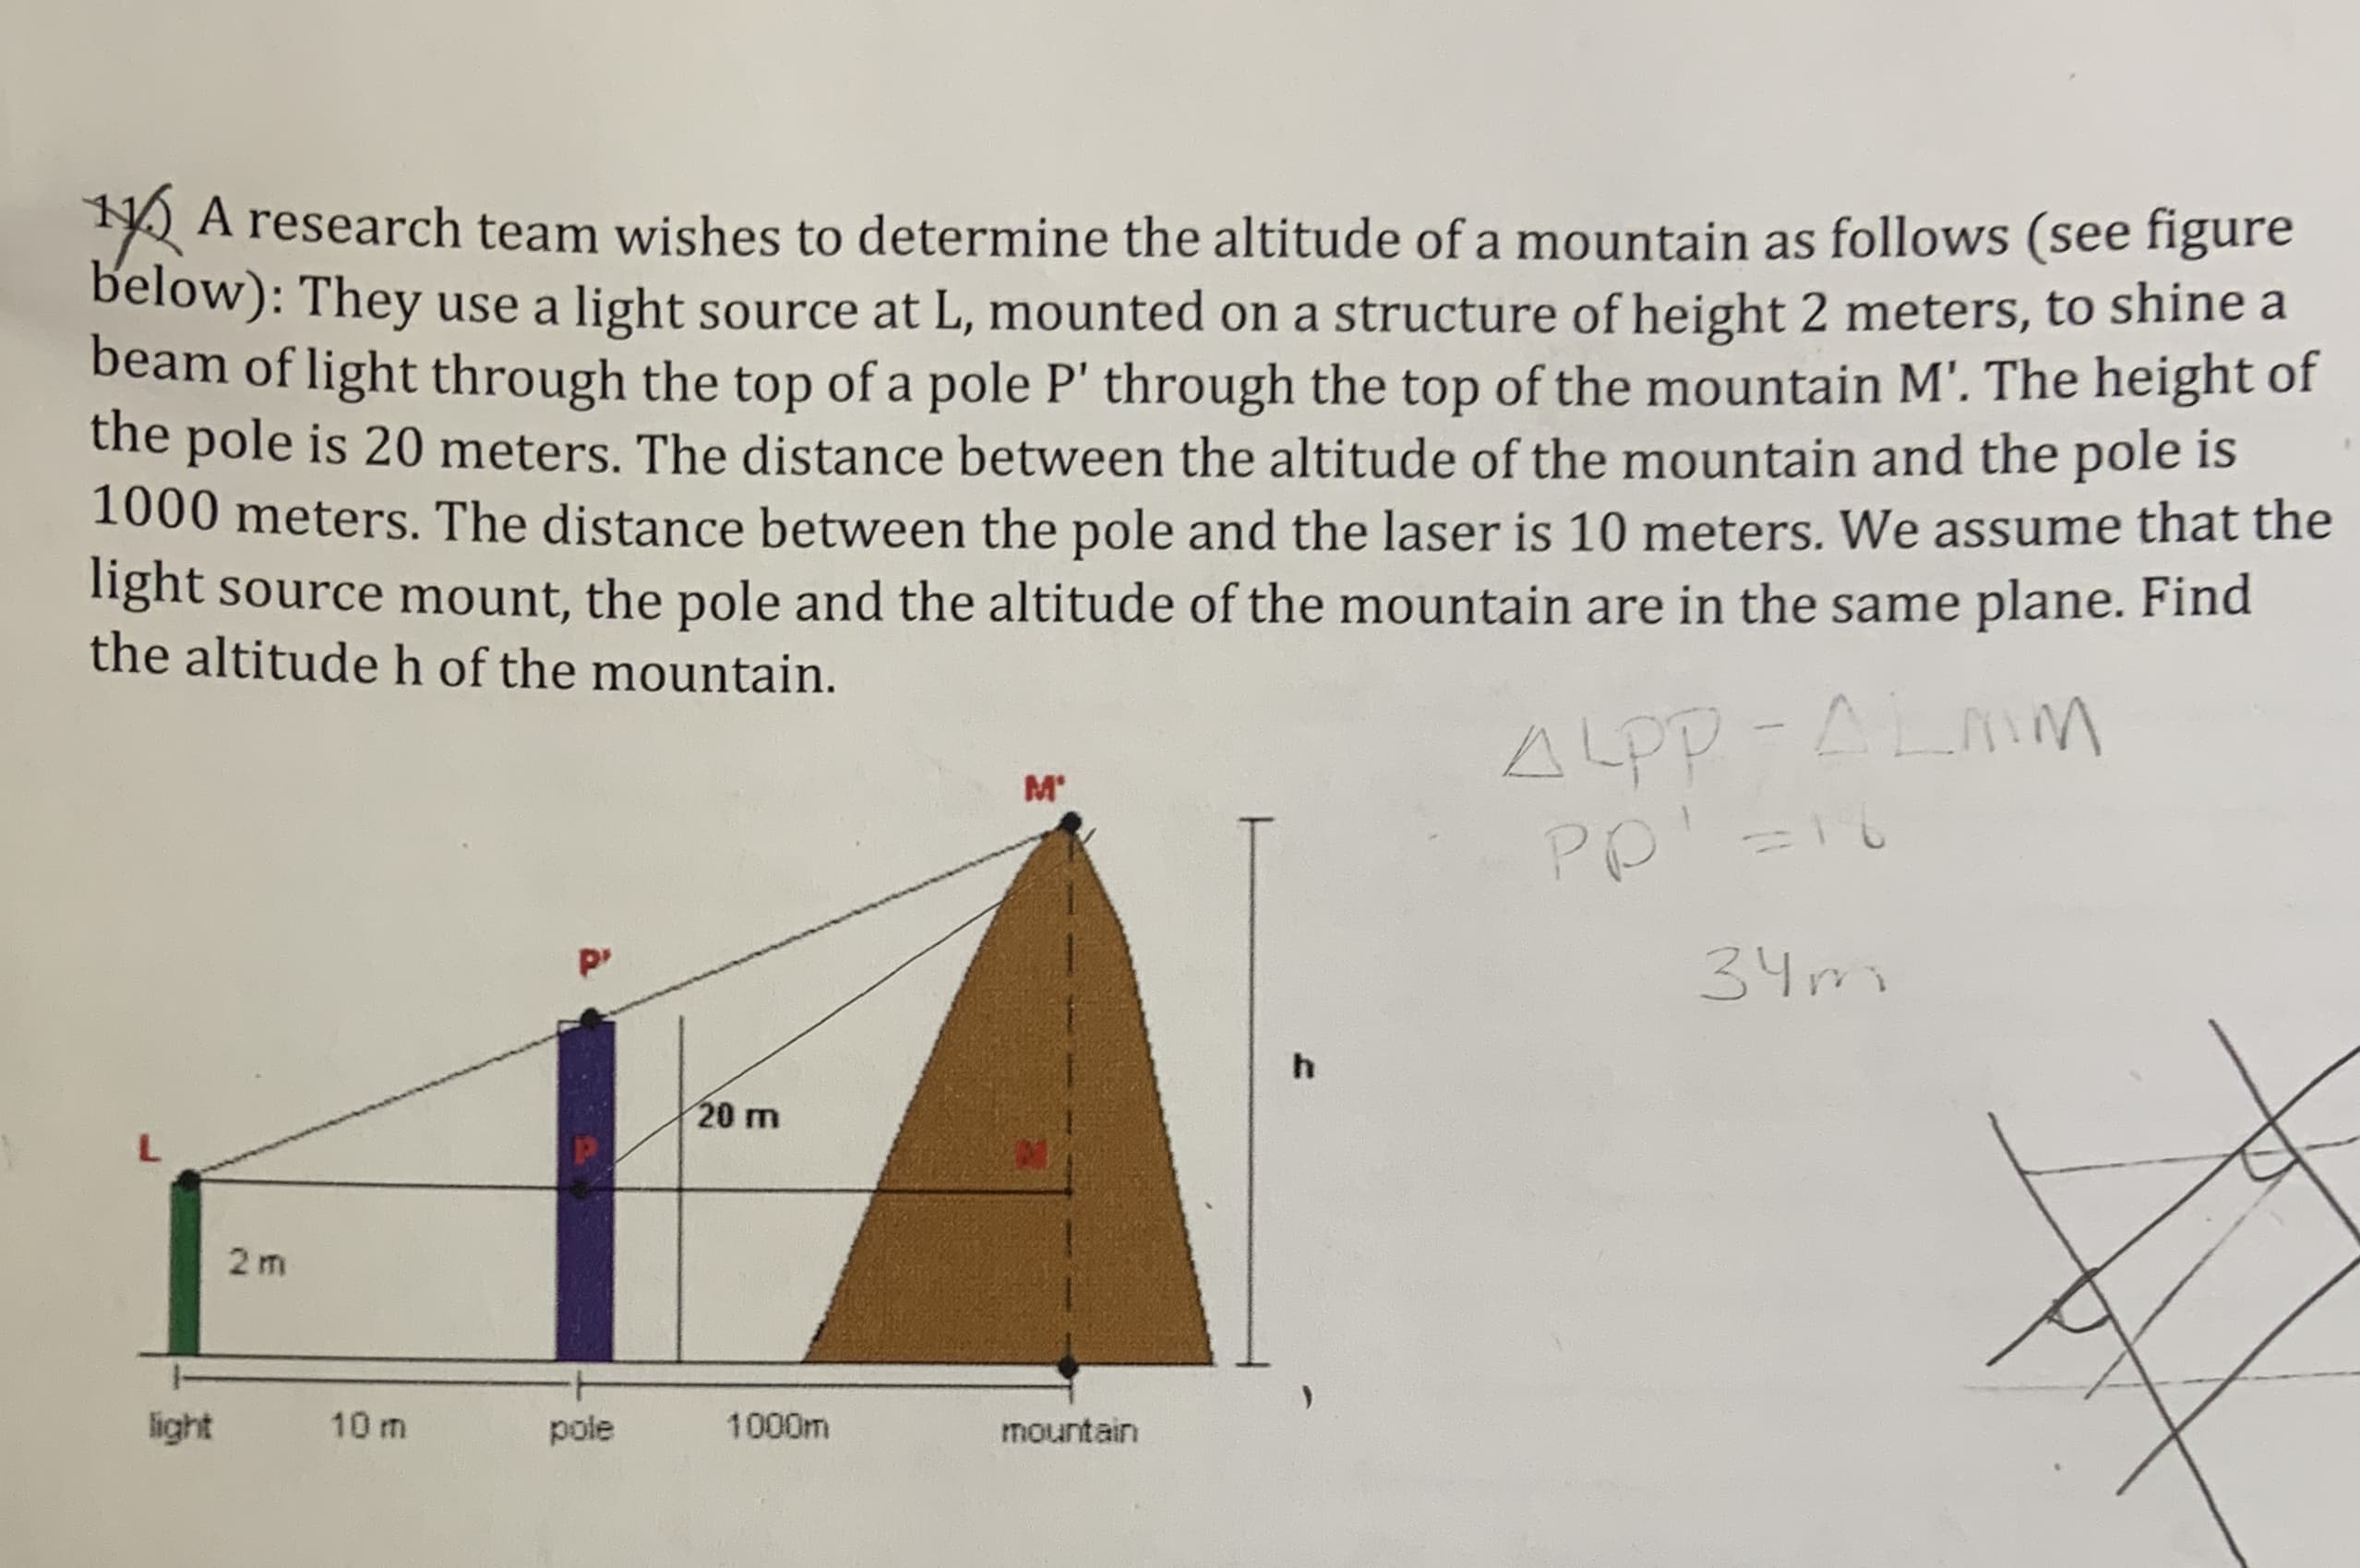 2 A research team wishes to determine the altitude of a mountain as follows (see figure
below): They use a light source at L, mounted on a structure of height 2 meters, to shine a
beam of light through the top of a pole P' through the top of the mountain M'. The height of
the pole is 20 meters. The distance between the altitude of the mountain and the pole is
1000 meters. The distance between the pole and the laser is 10 meters. We assume that the
light source mount, the pole and the altitude of the mountain are in the same plane. Find
the altitude h of the mountain.
ALPP-ALAM
M'
PP
P'
34mo
20 m
2 m
light
10 m
pole
1000m
mountain
